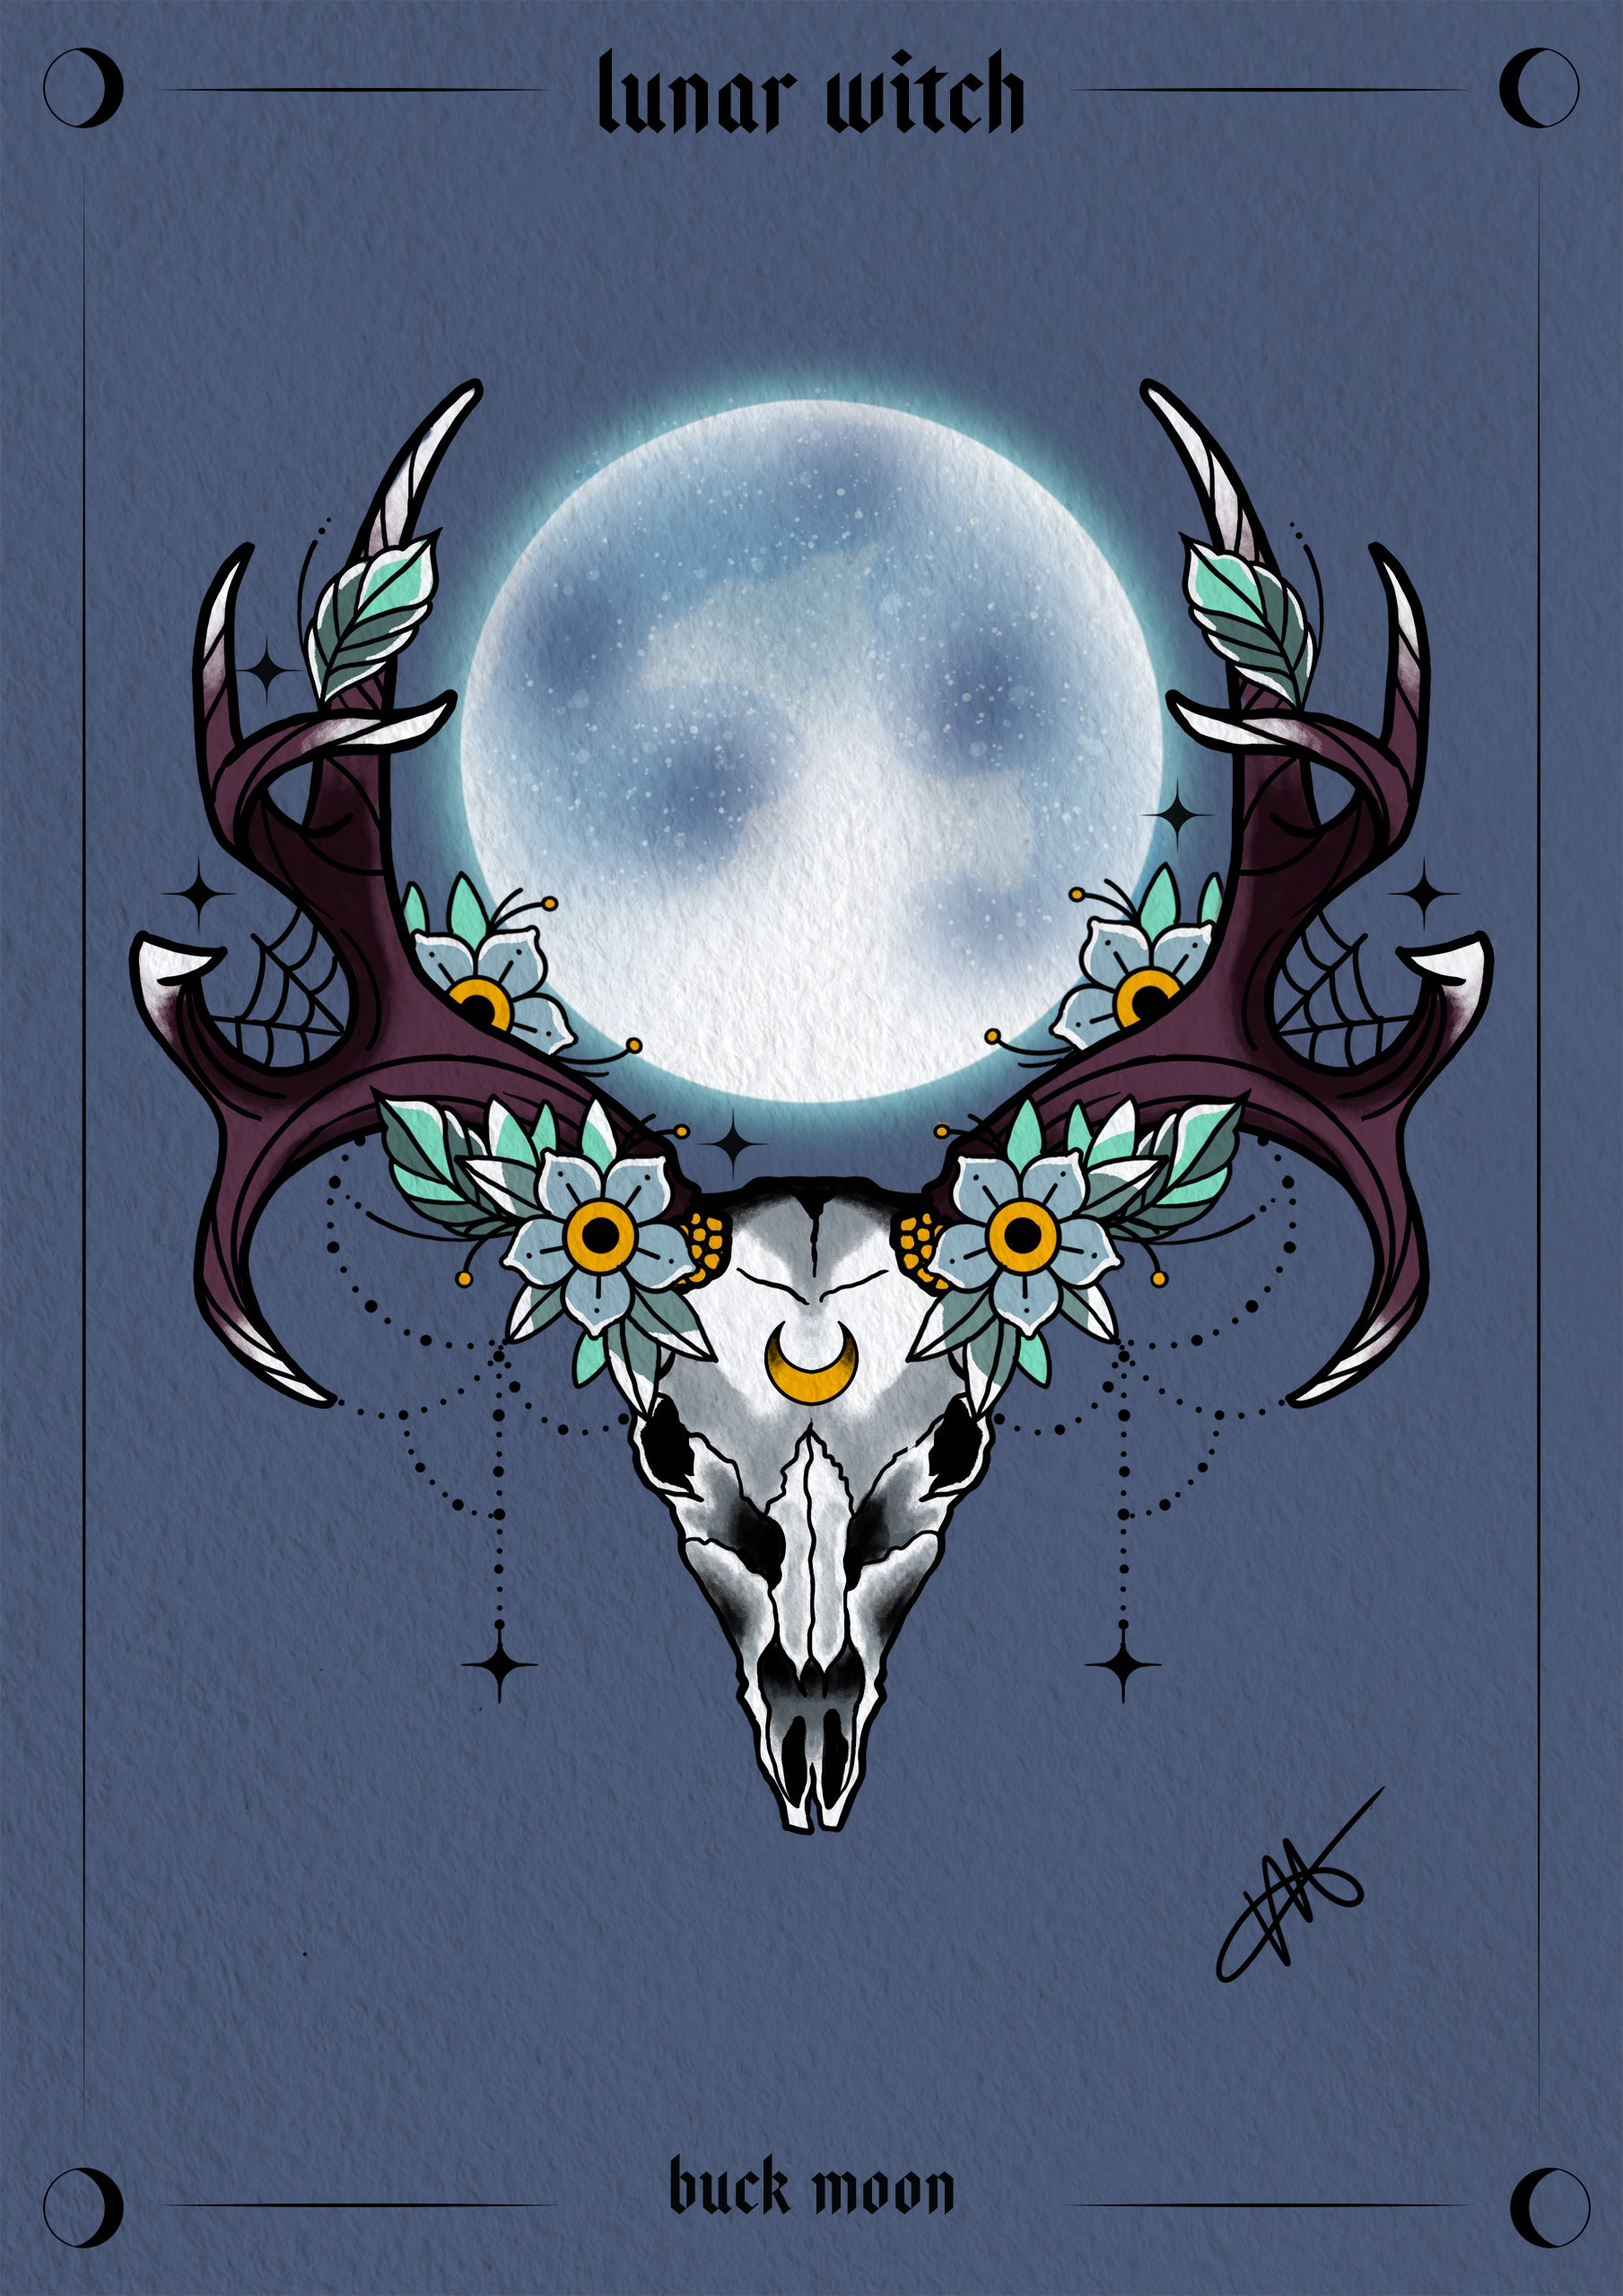 The Buck Moon & Lunar Witch's Reflection